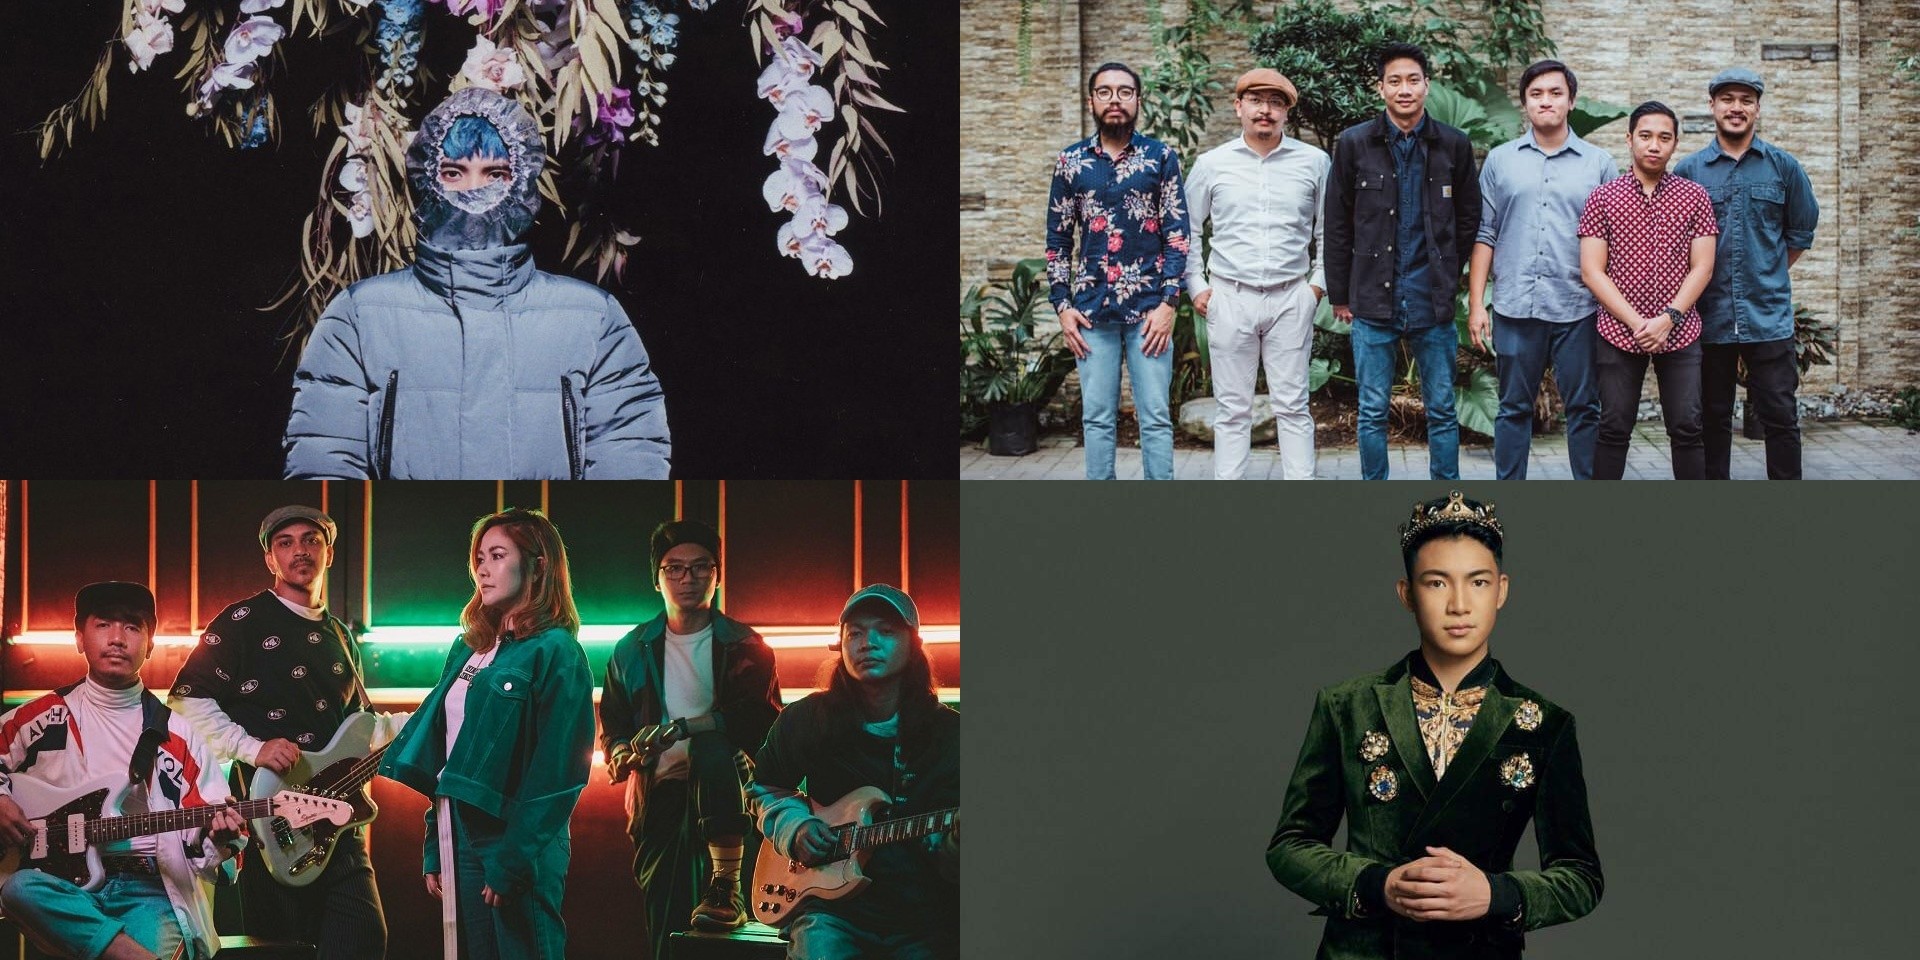 No Rome, Lions & Acrobats, Yeng Constantino, Darren Espanto, and more release new music